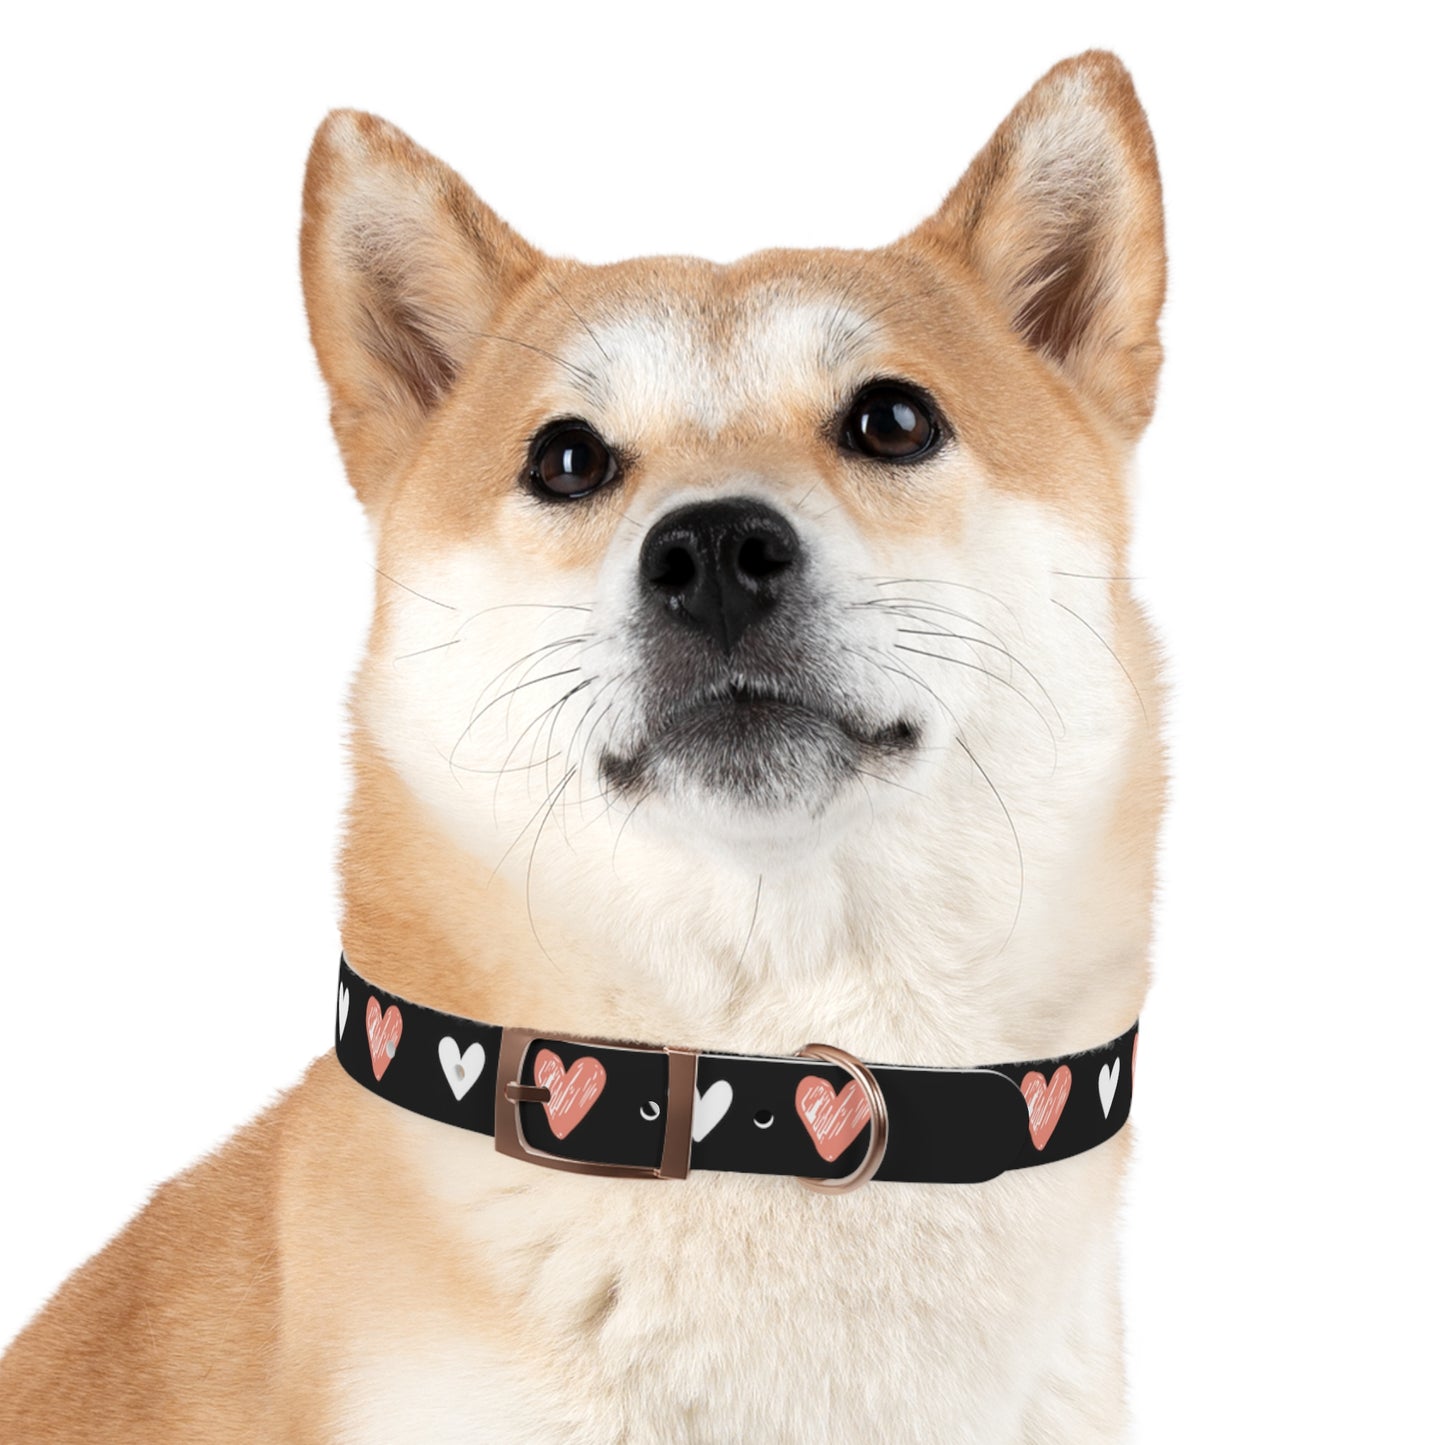 a cute dog wearing a dog collar with a beautiful hearts pattern design. The color of the dog collar is black